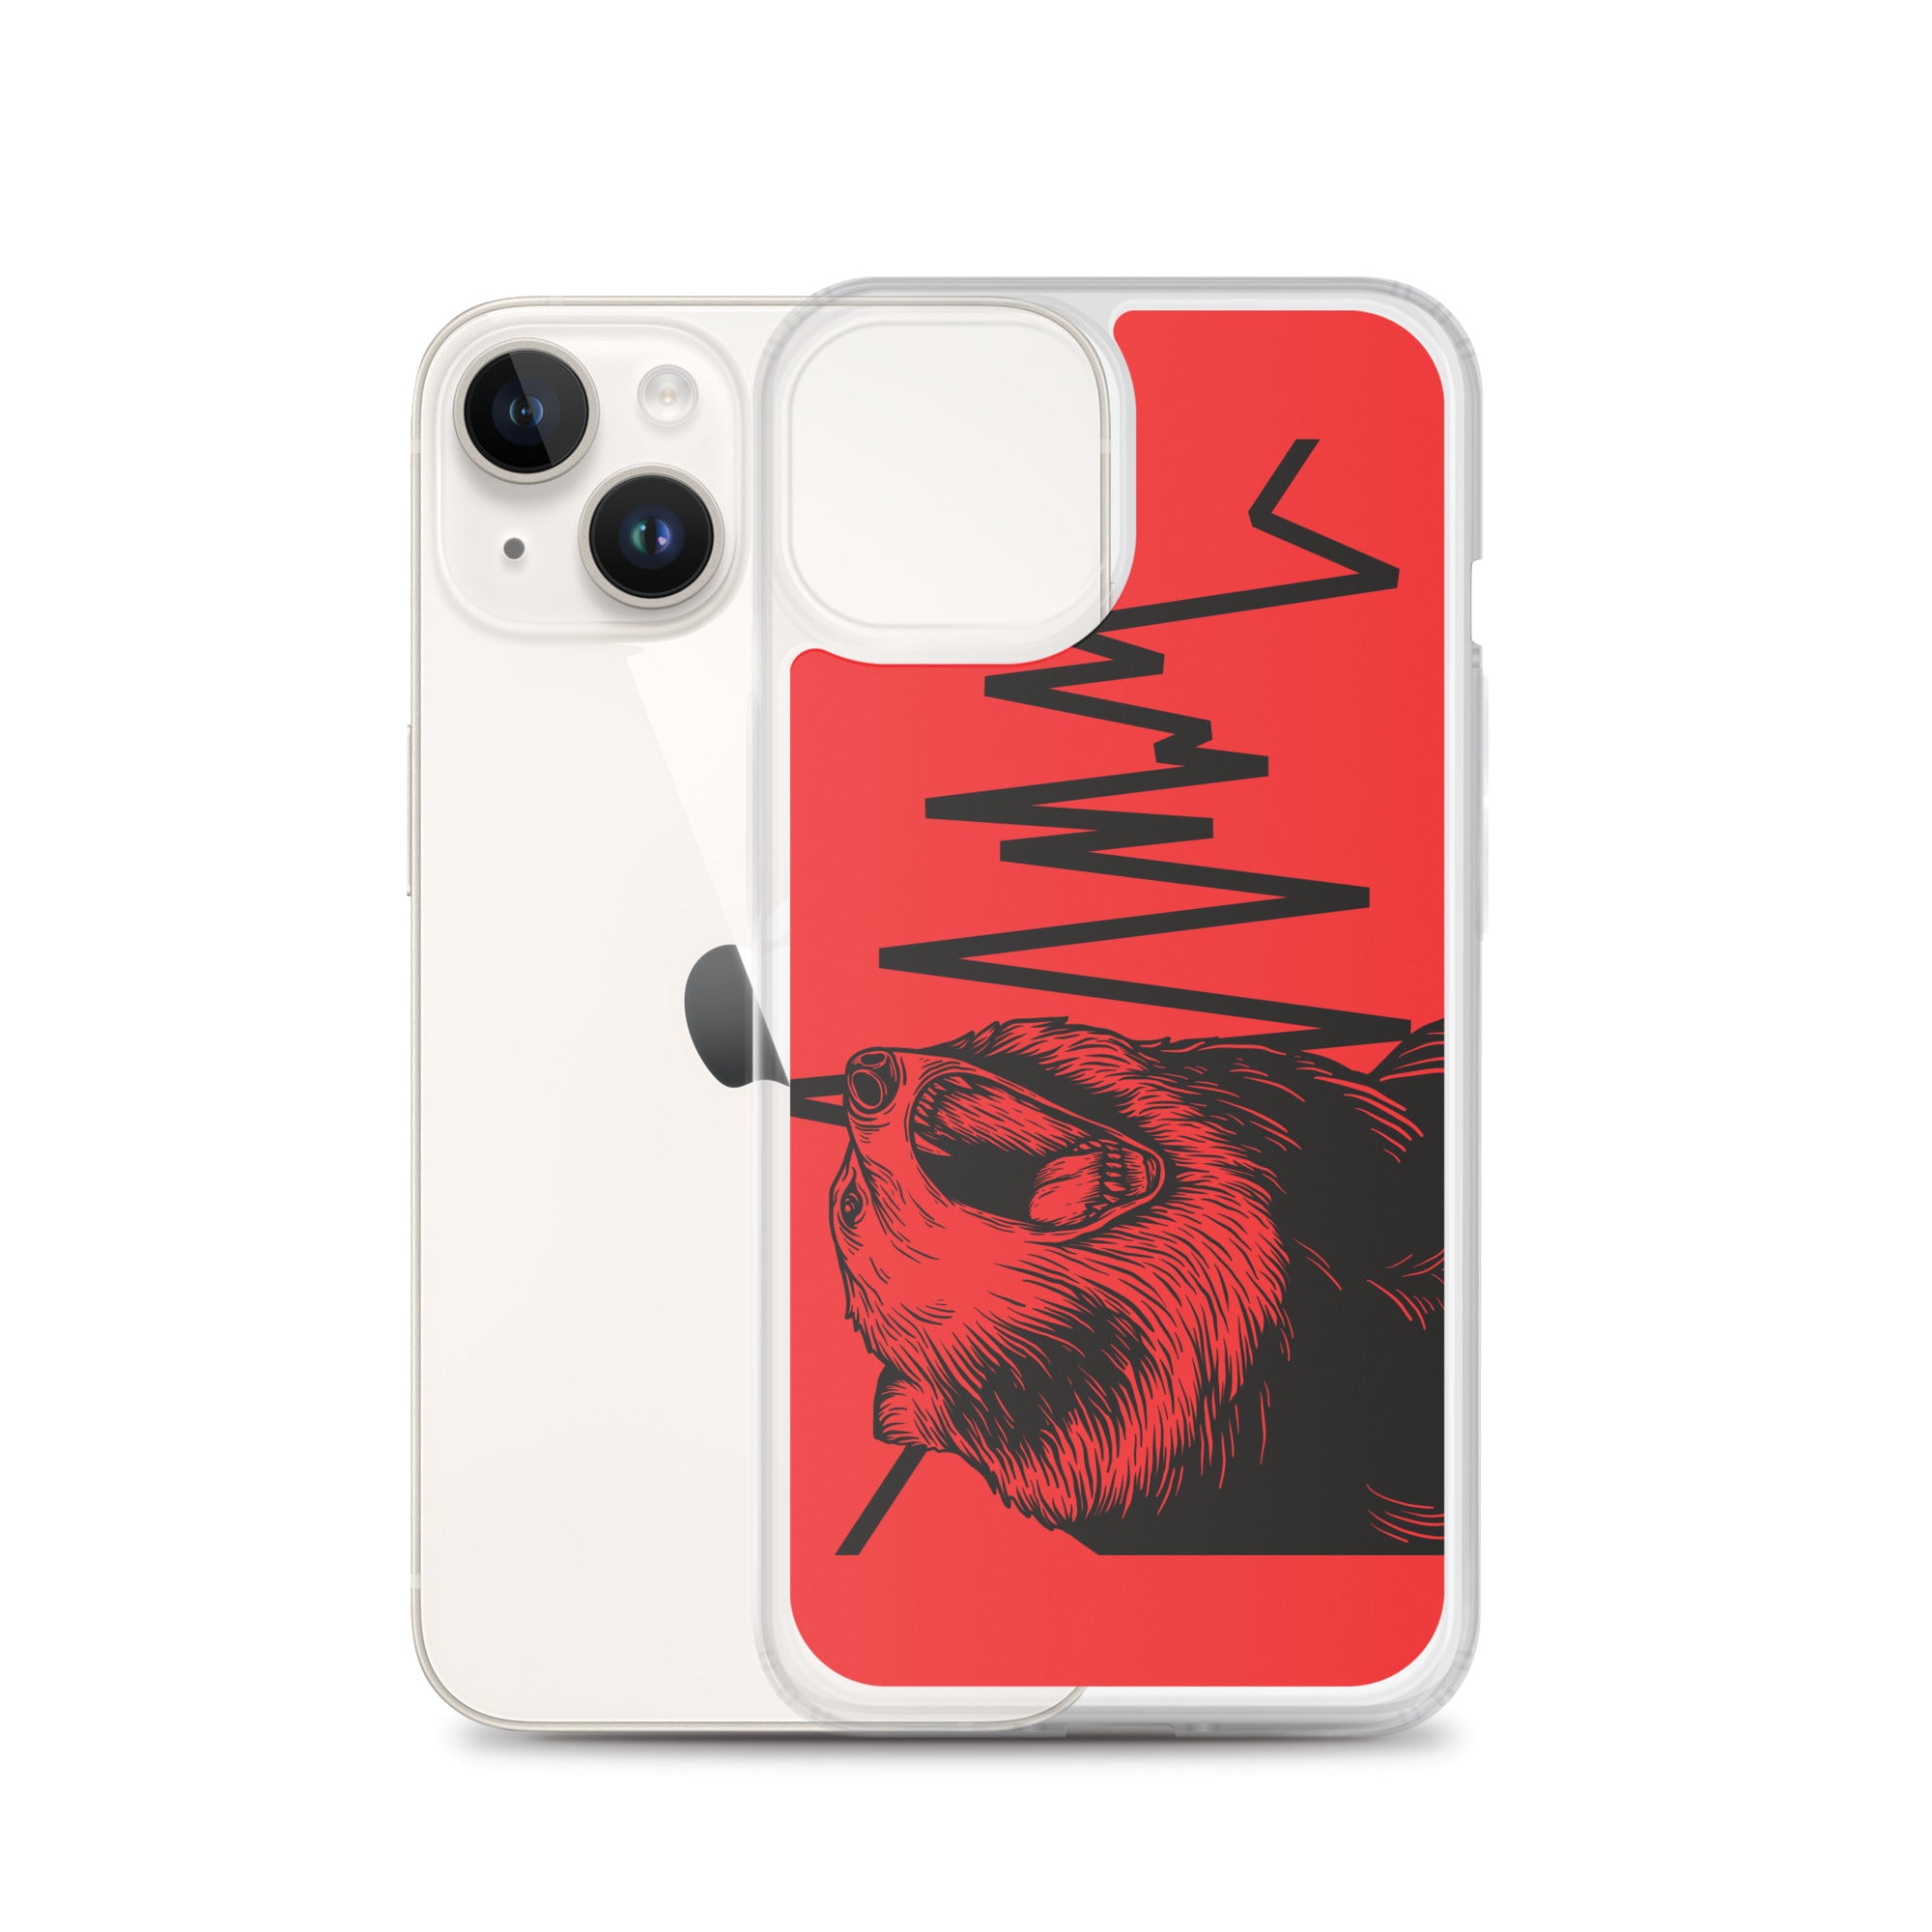 Coque iPhone - Ours vers le bas